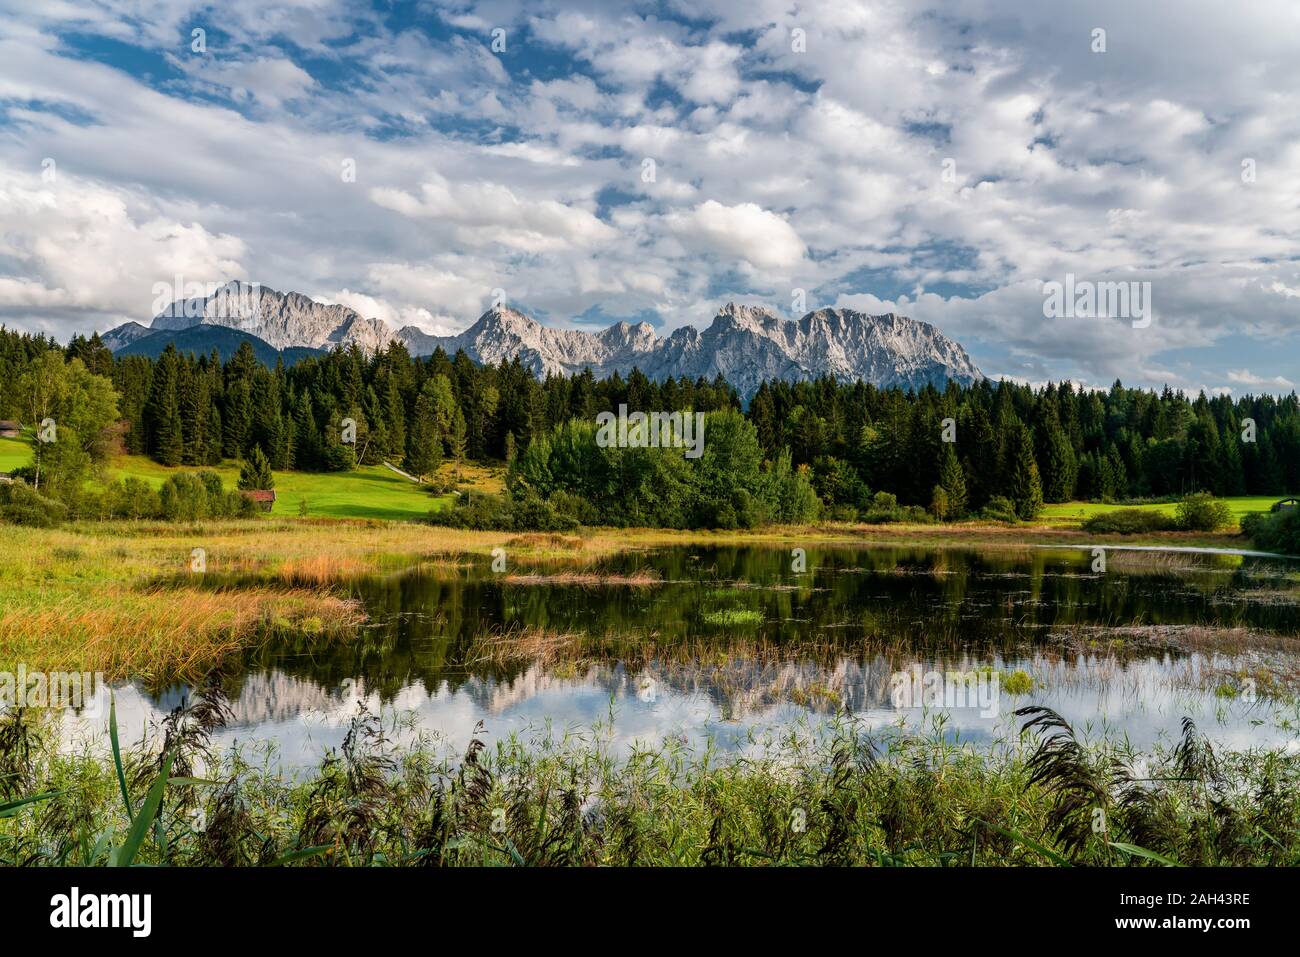 Germany, Bavaria, Scenic view of Tennsee lake with Wetterstein Mountains in background Stock Photo